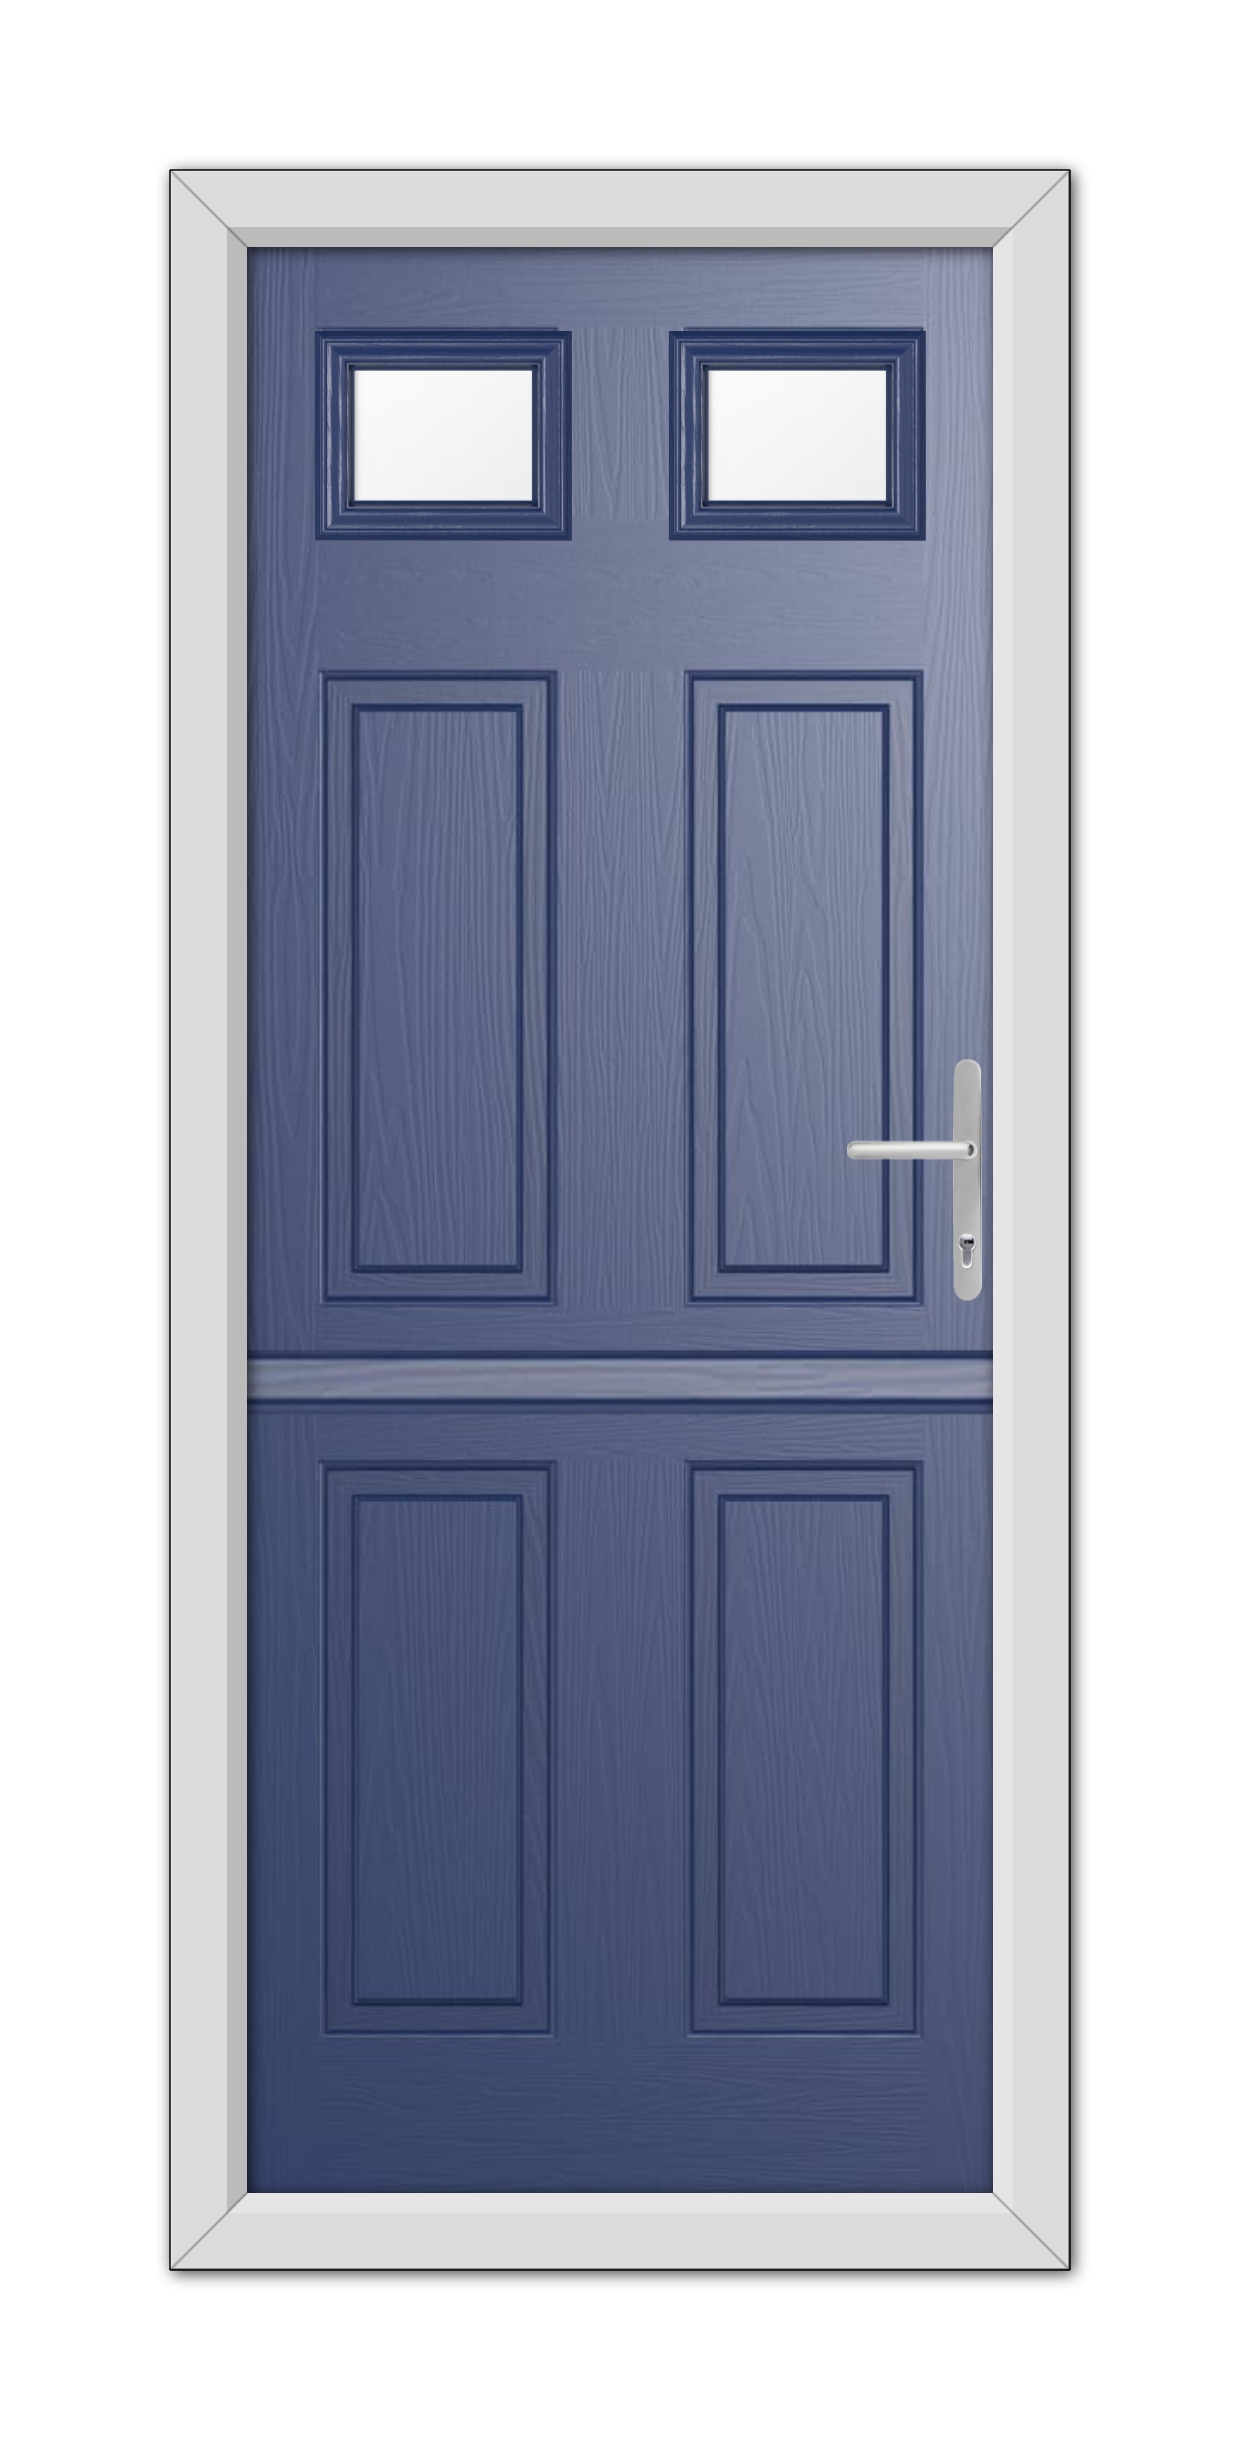 A Blue Middleton Glazed 2 Stable Composite Door 48mm Timber Core with a silver handle and three small rectangular windows, set within a white door frame.